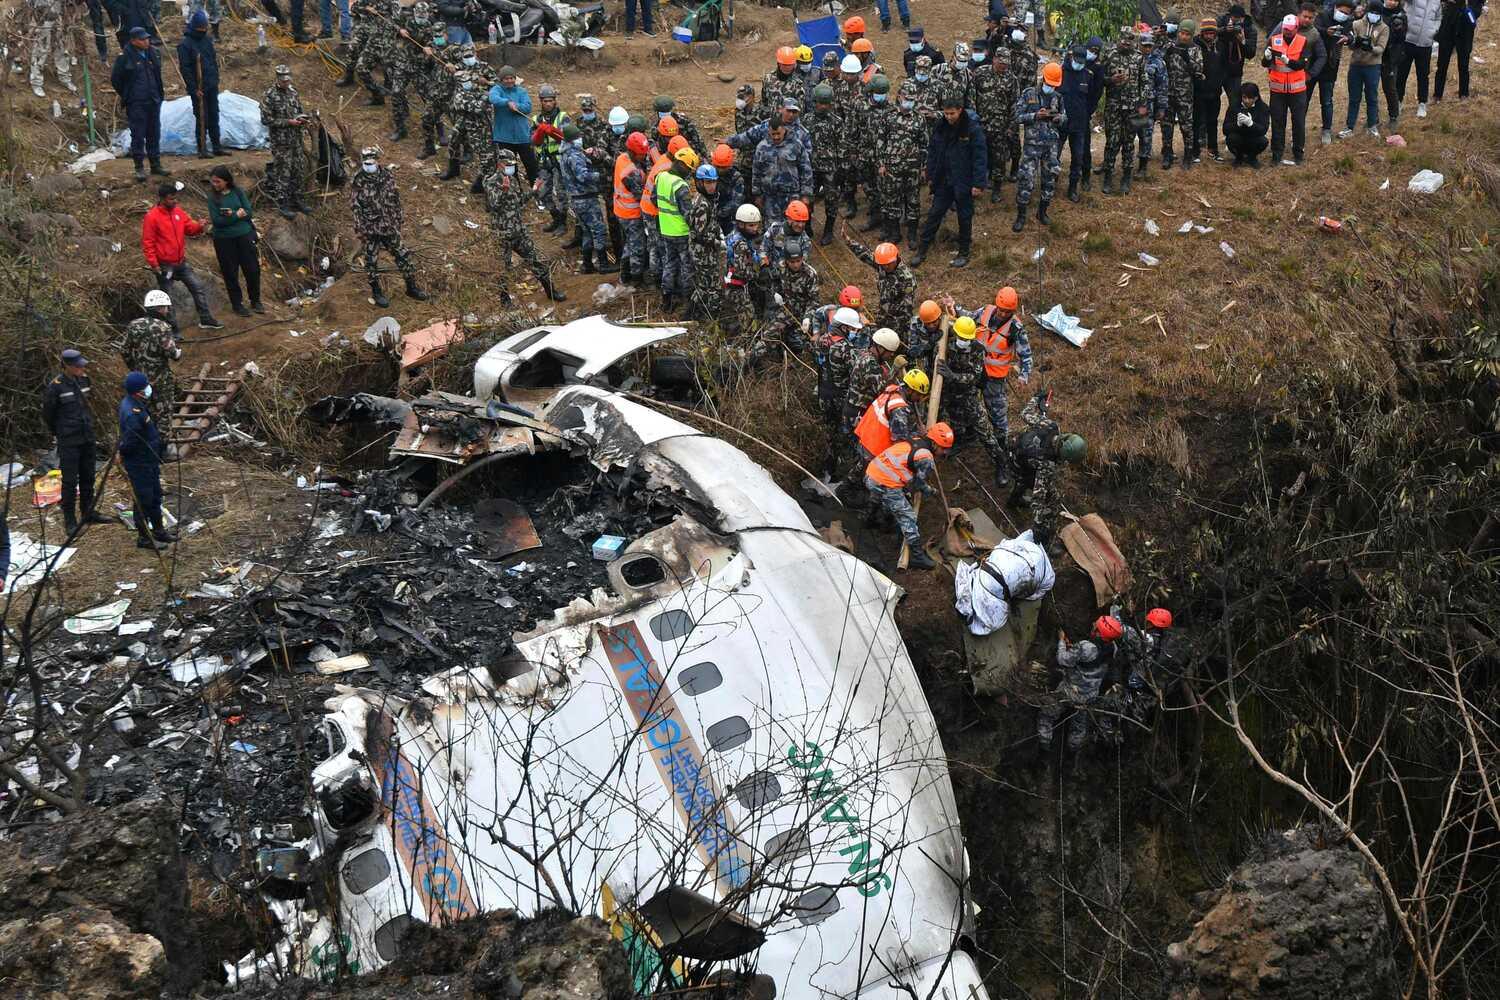 Rescuers on Monday recovering the body of a victim who died in a Yeti Airlines plane crash in Pokhara, Nepal, the day before. Seventy-two people were on the flight.